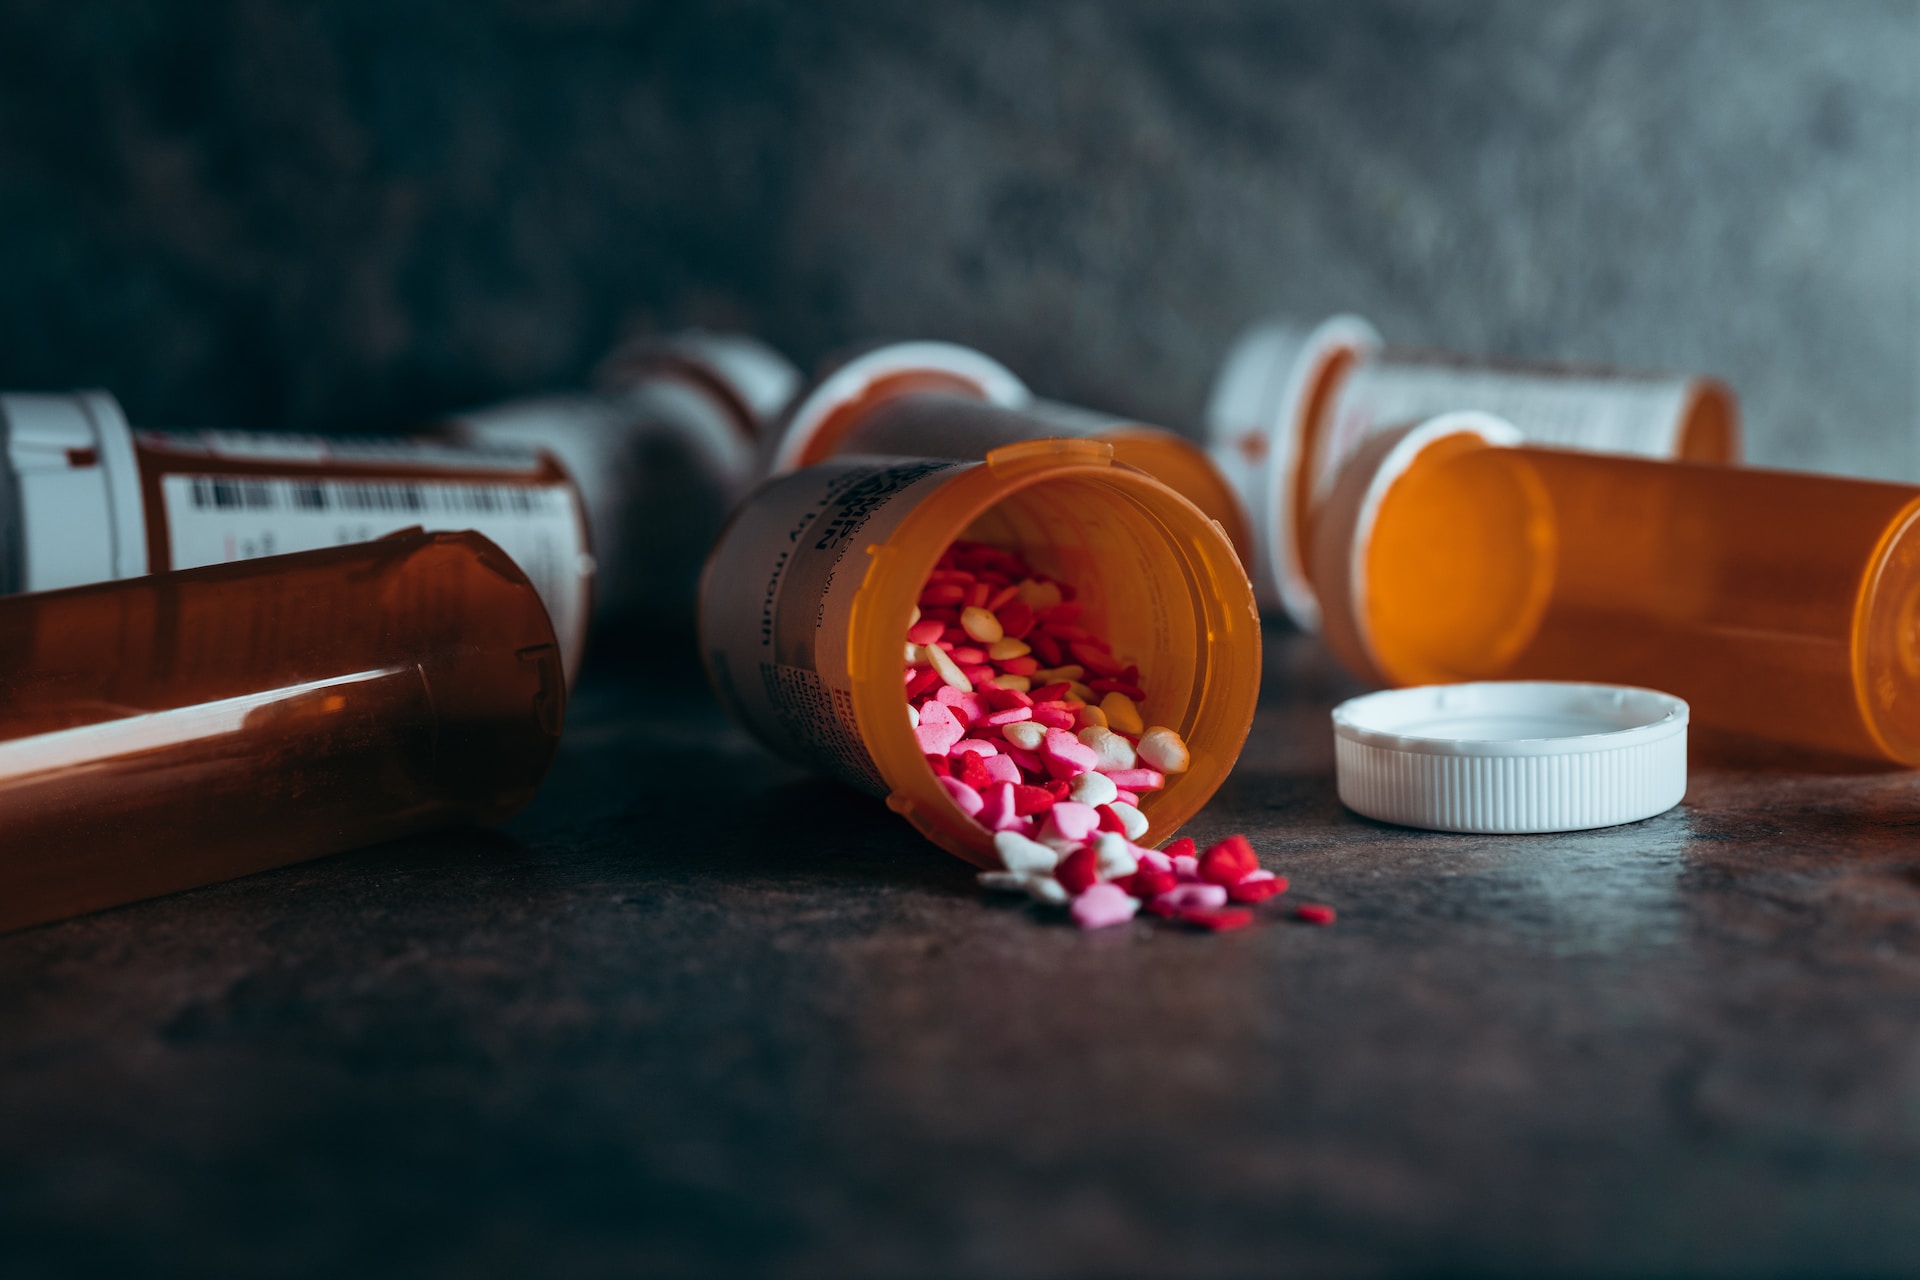 image of open container of medicines - featured image for What Does Xanax Feel Like? Exploring the Effects and Experiences published on healthy n better living